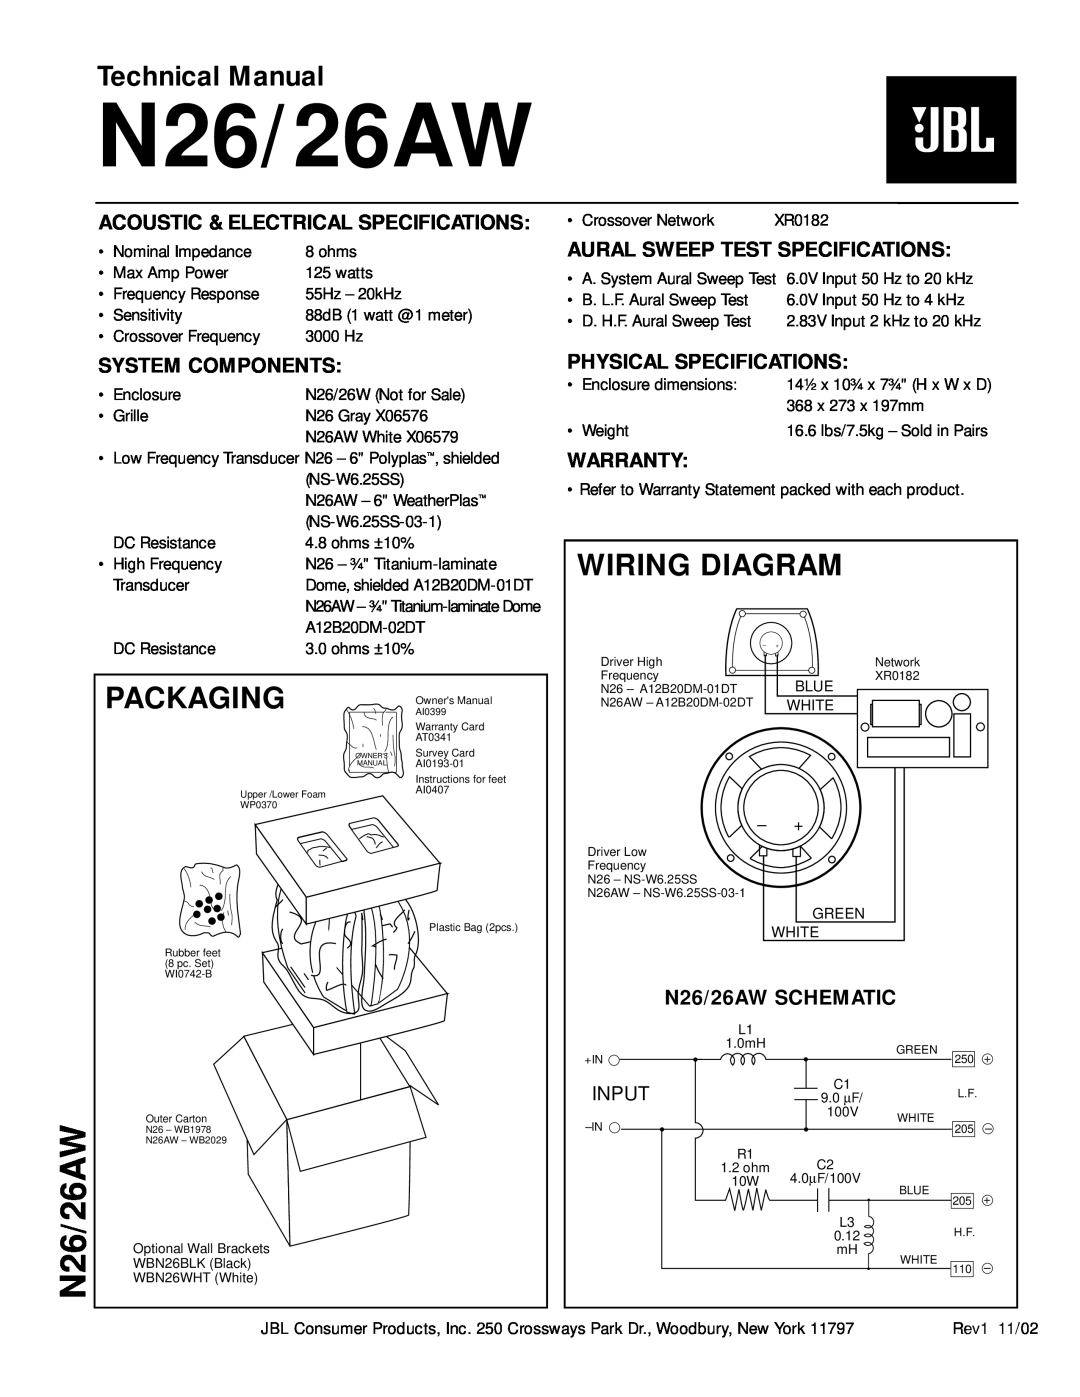 JBL N26/26AW technical manual Wiring Diagram, Packaging, Technical Manual, Acoustic & Electrical Specifications, Warranty 